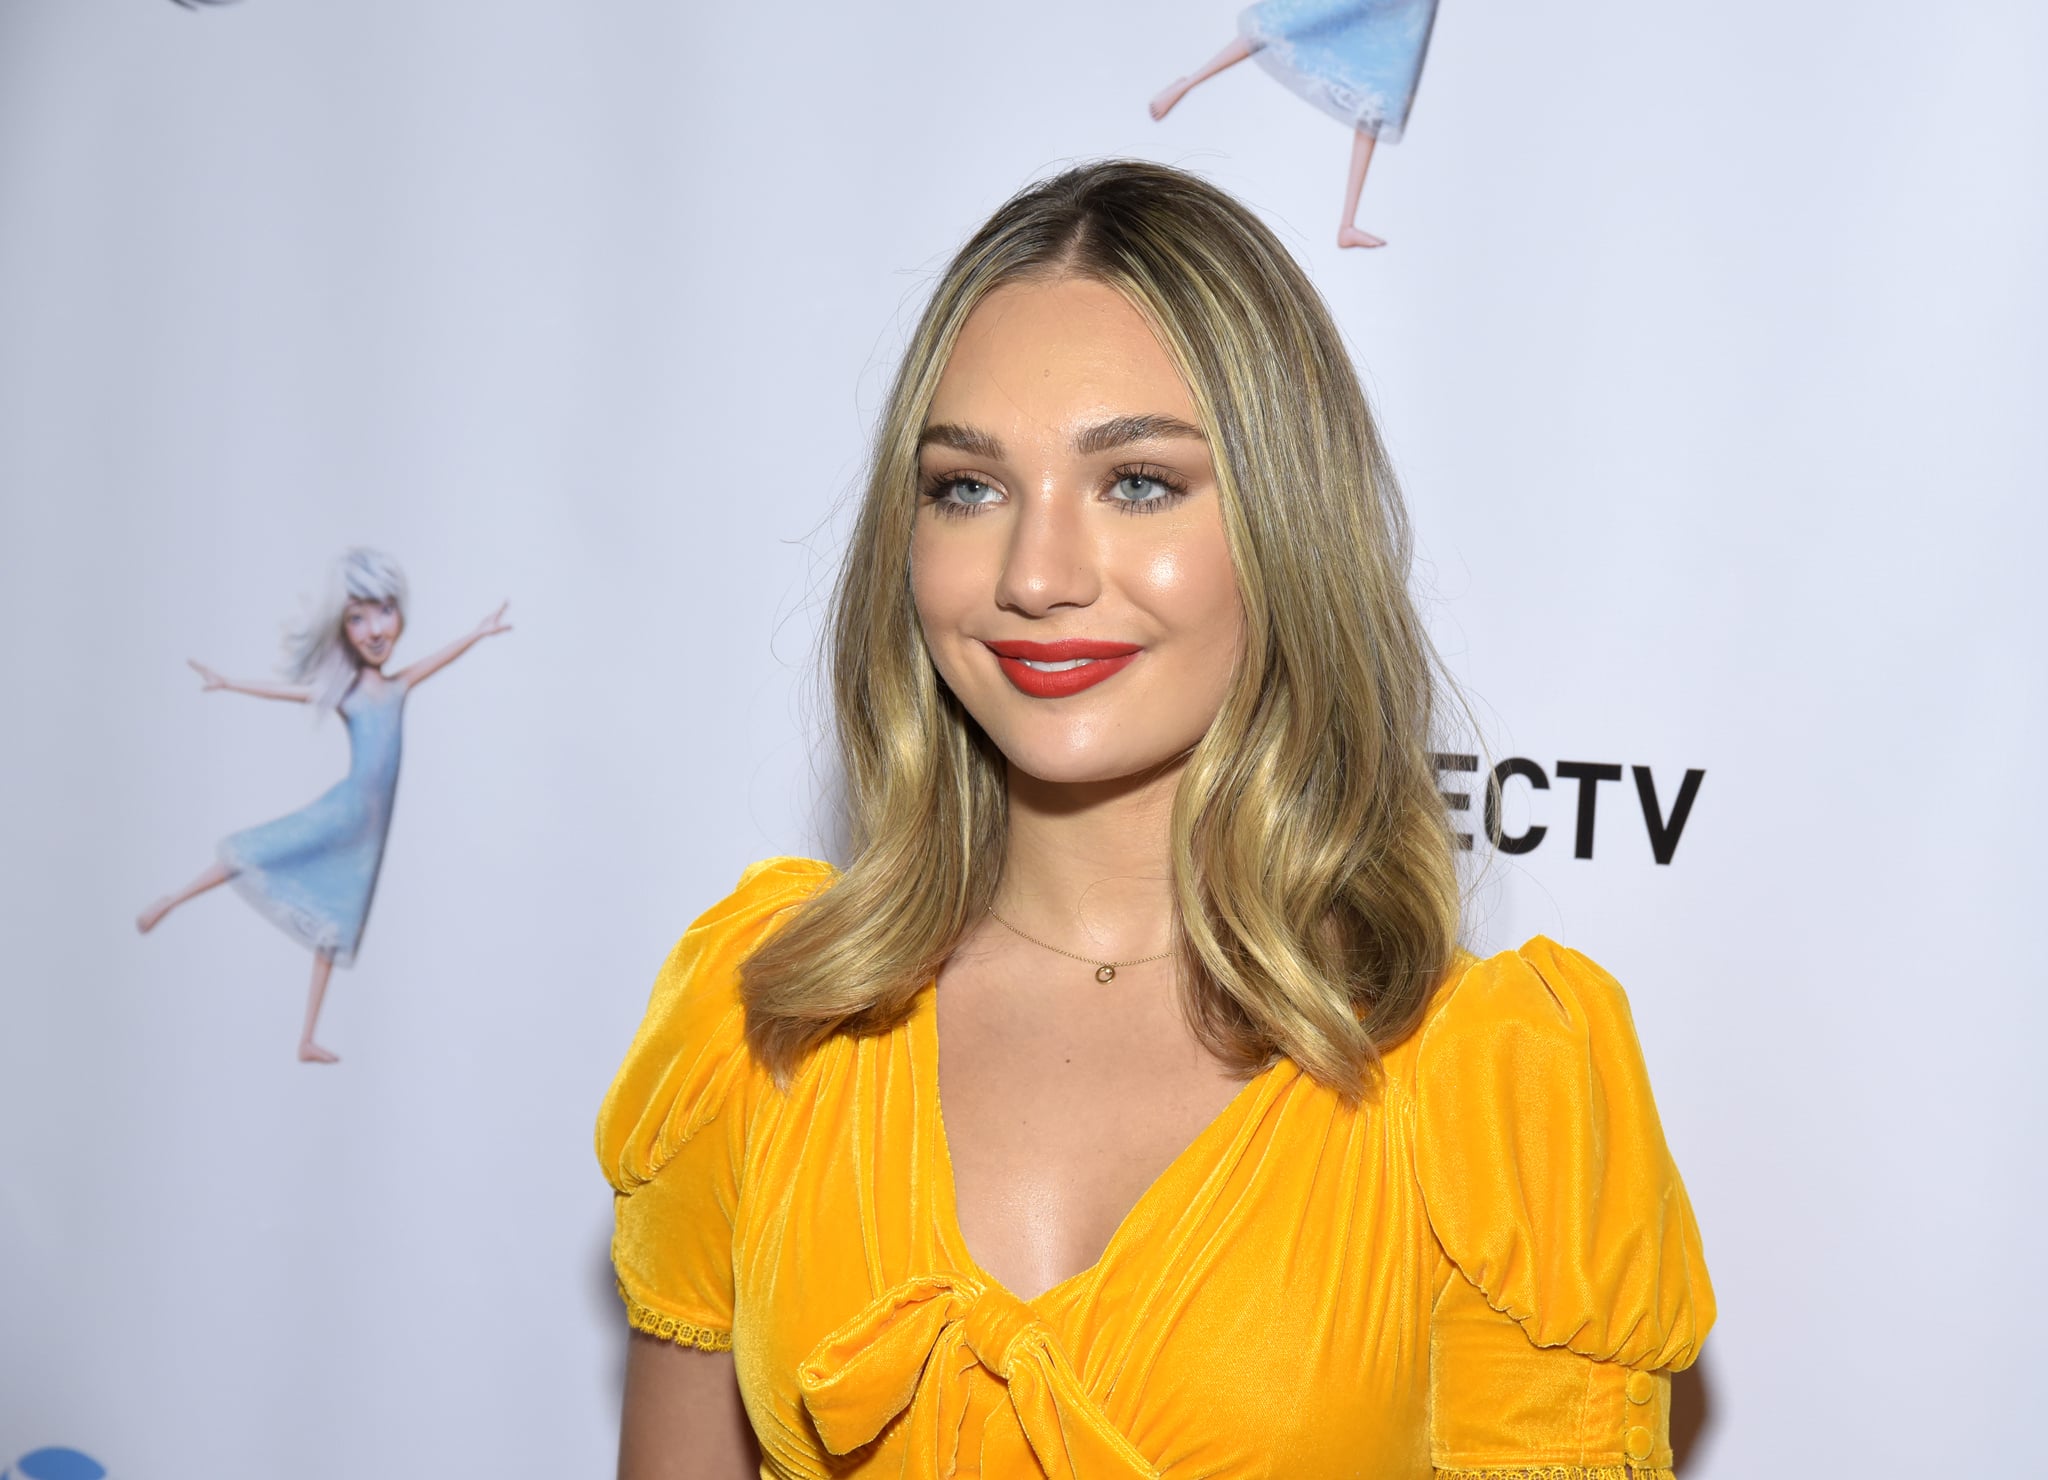 SANTA MONICA, CALIFORNIA - NOVEMBER 16: Actor Maddie Ziegler and attends the Los Angeles premiere of